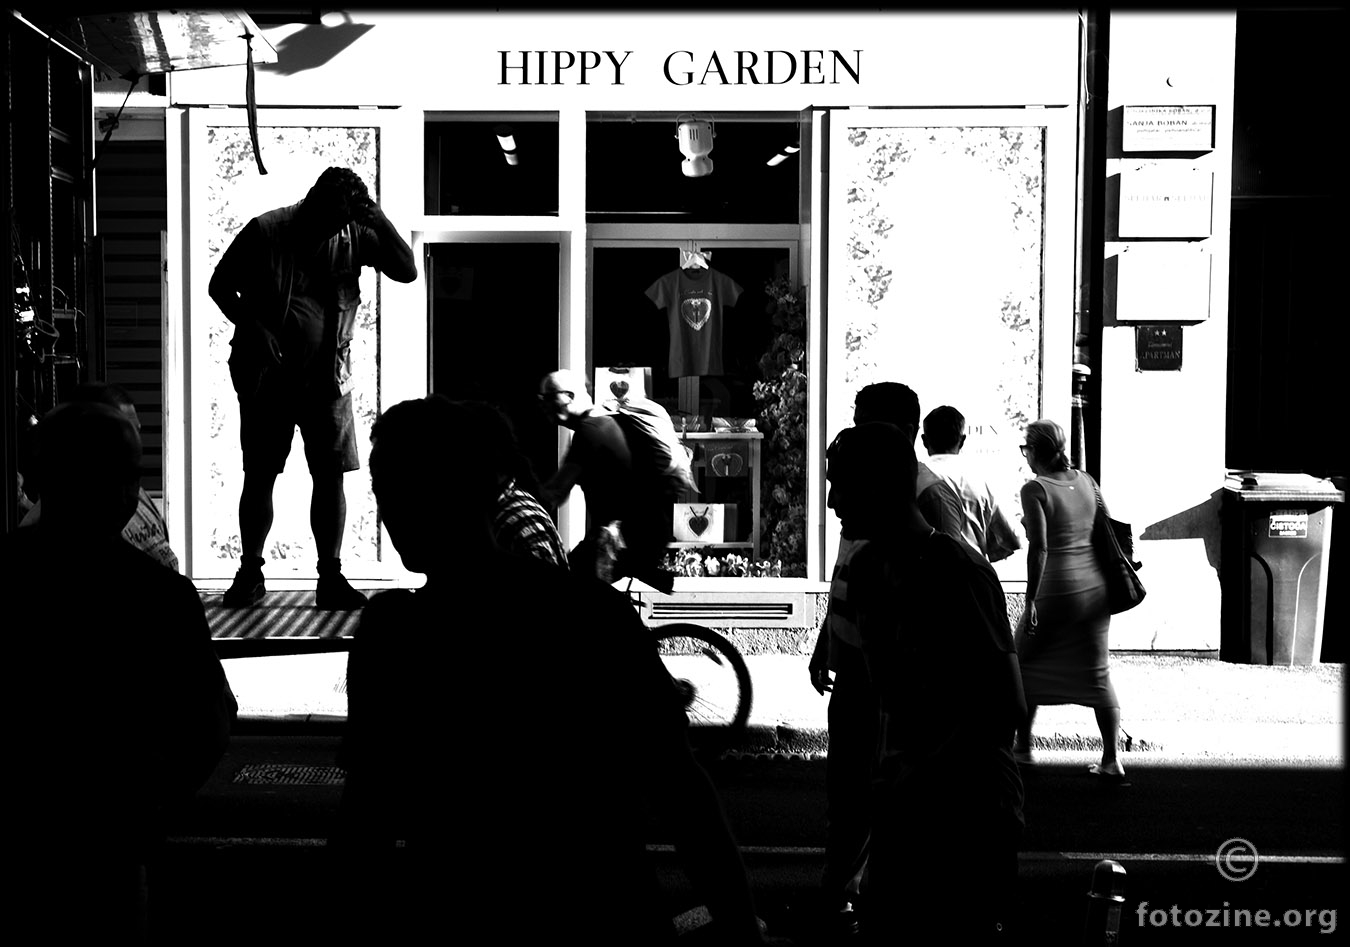 Hippy garden gone to hell...